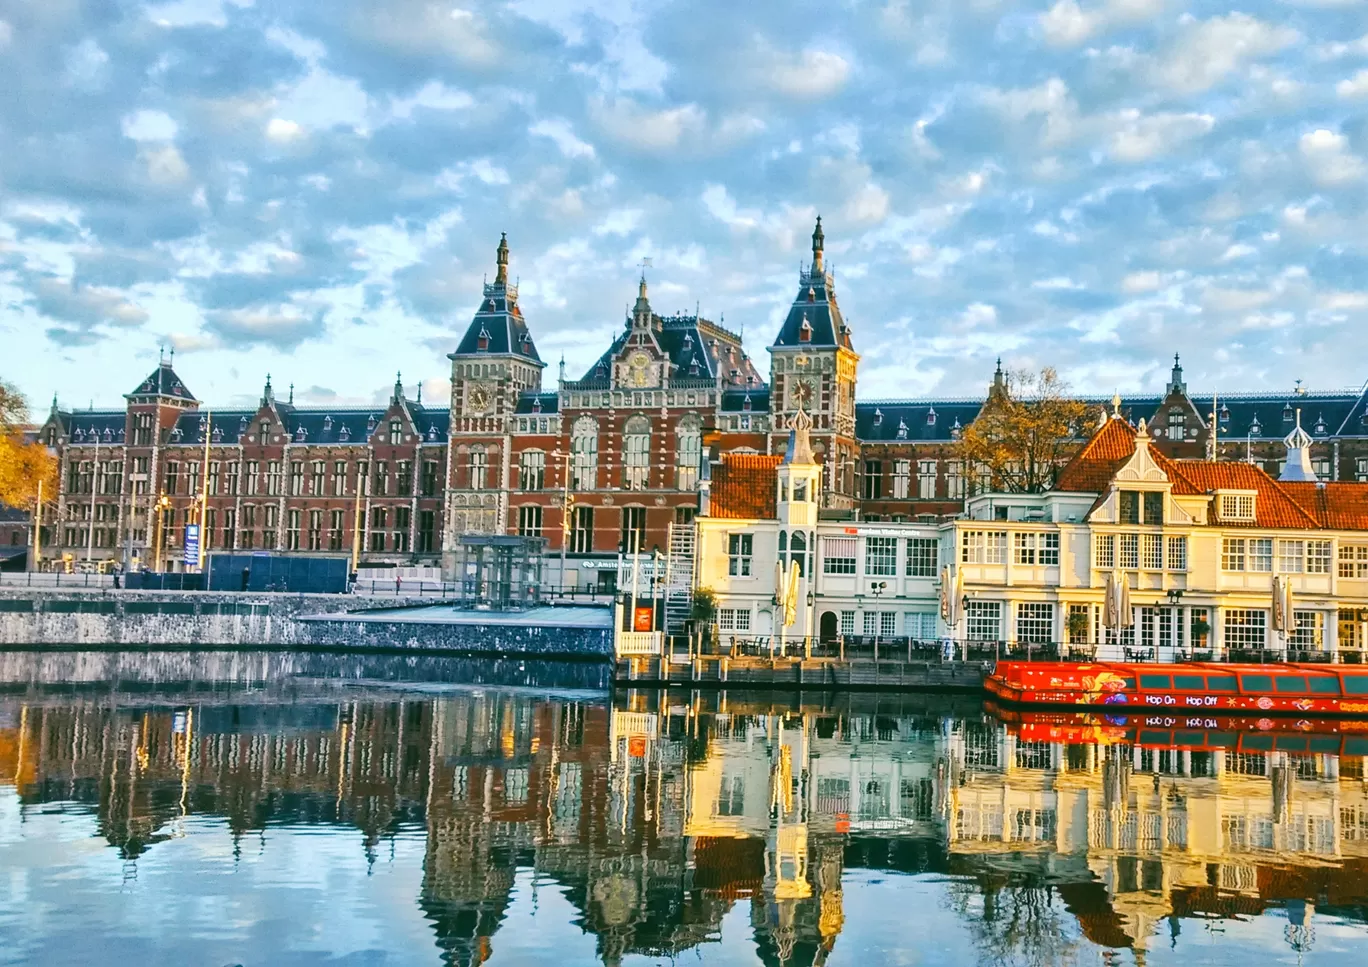 Photo of Amsterdam Centraal By vimal chavda